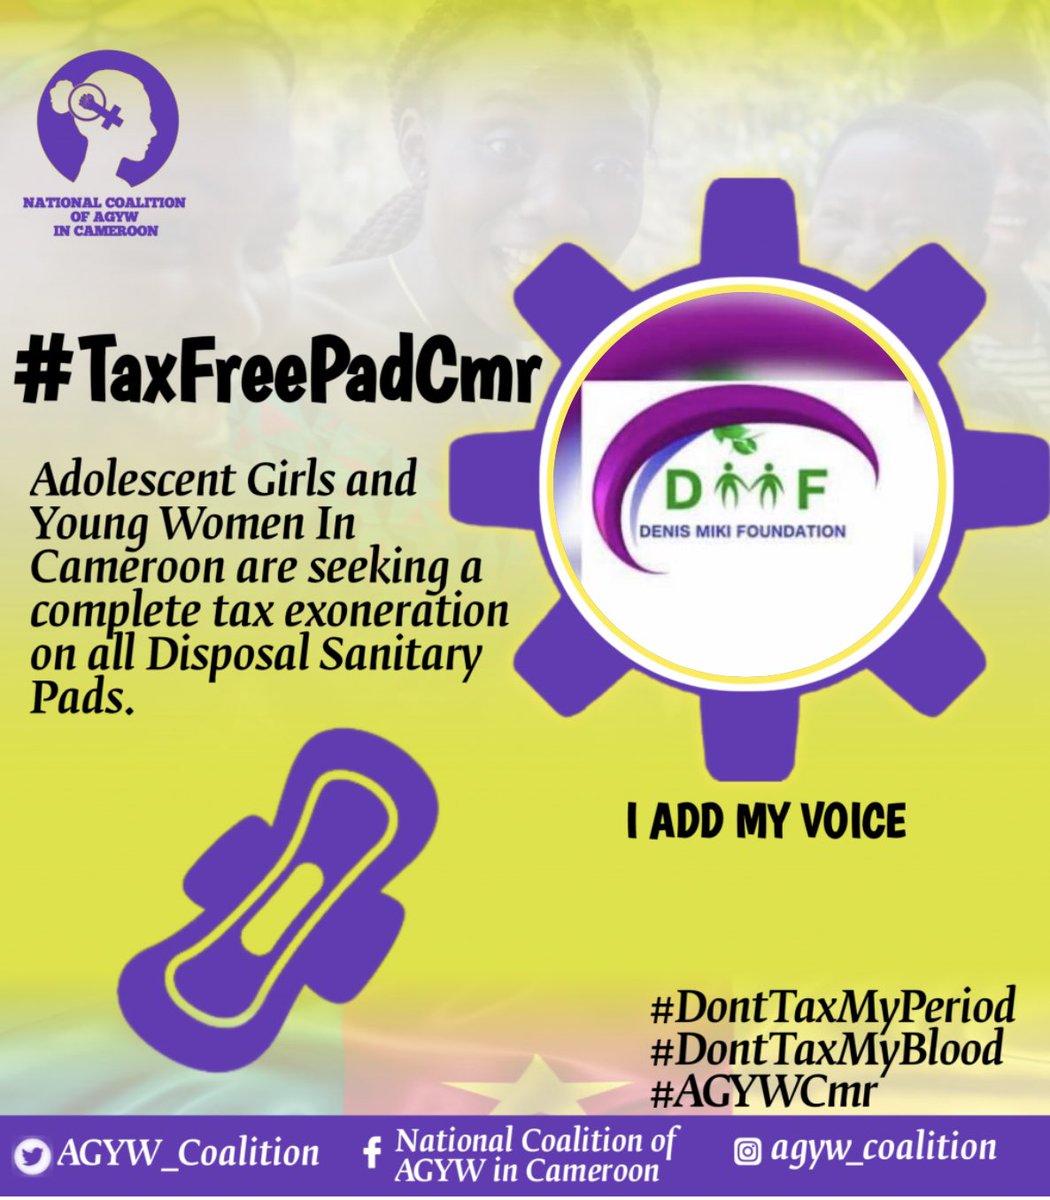 On #WorldMenstrualHygieneDay we support the #TaxFreePadCmr campaign by Adolescent Girls and Young Women (AGYW) In Cameroon seeking a complete tax exoneration on all Disposal Sanitary Pads 🩸 
#DontTaxMy Period
#DontTaxMyBlood
#AGYWCmr
#HerVoiceMyVoice